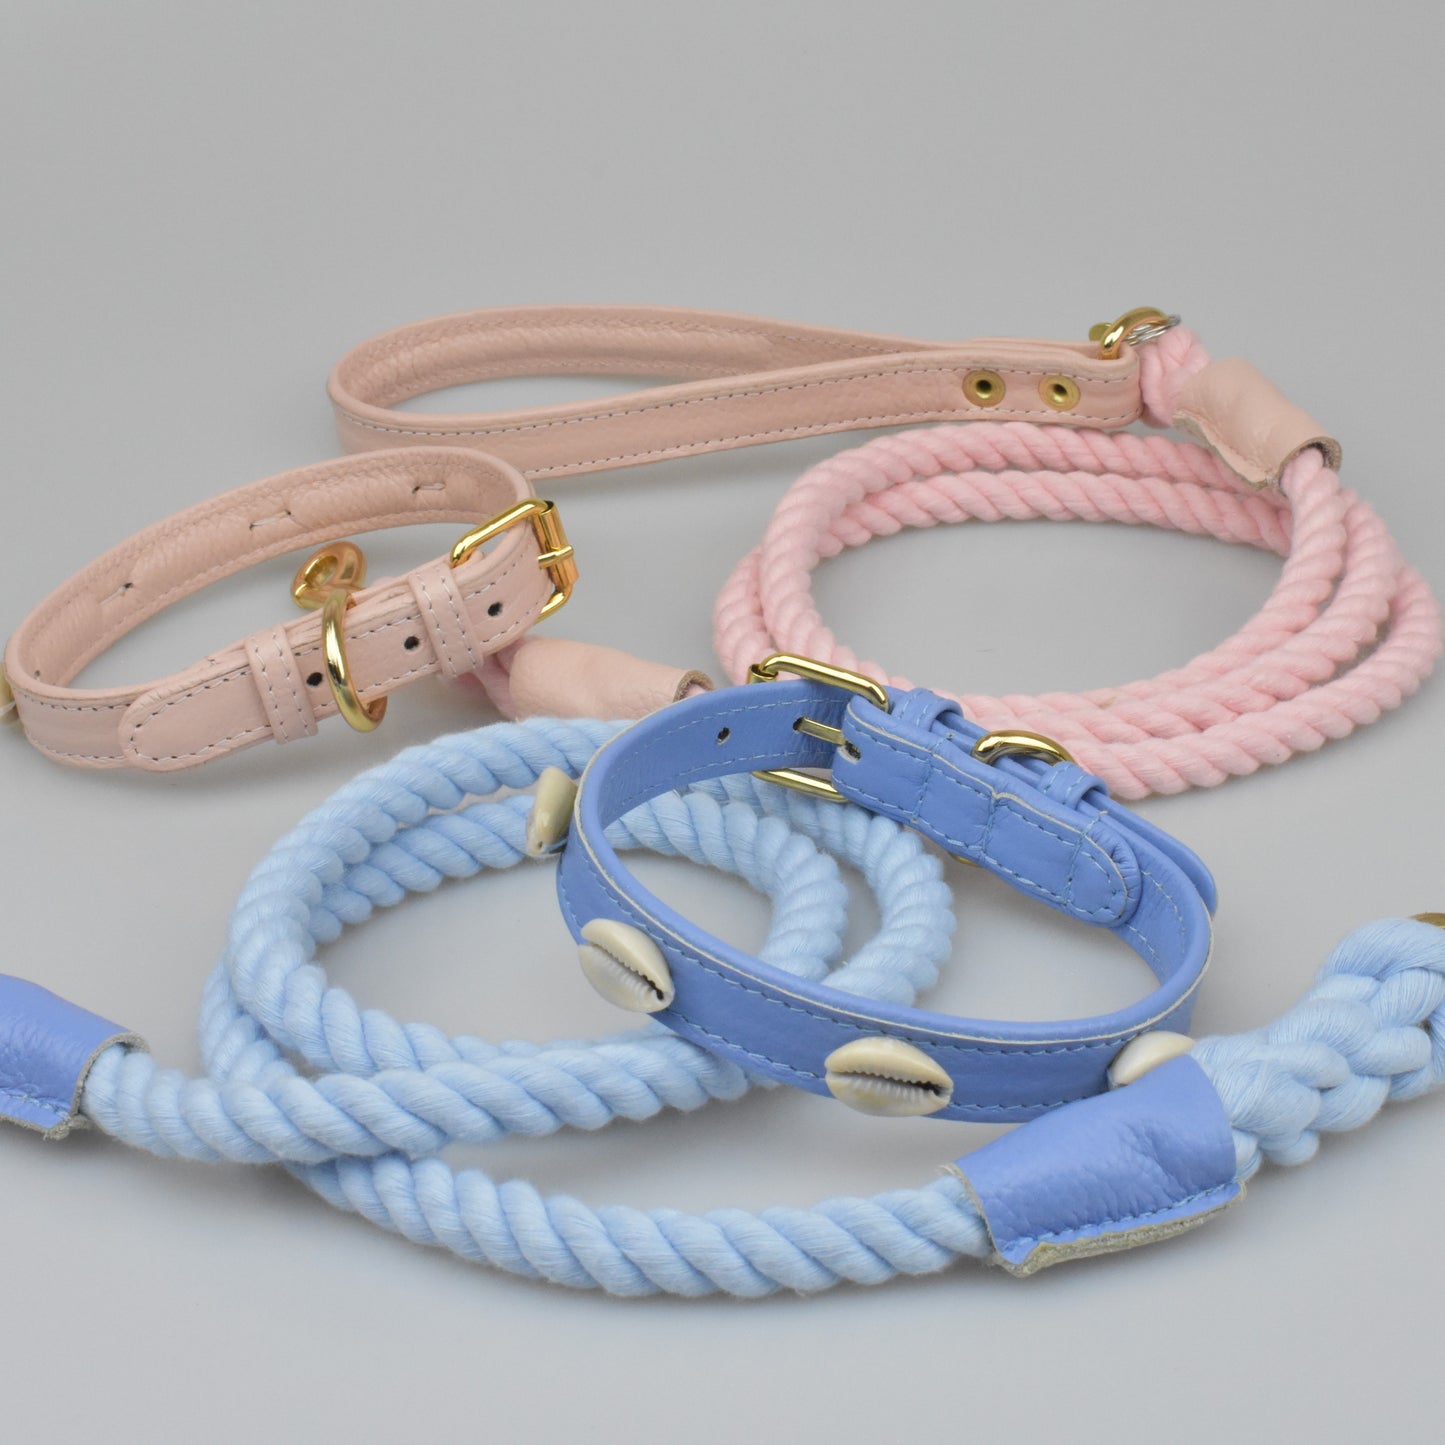 Willow Walks rope lead with leather handle in soft pink